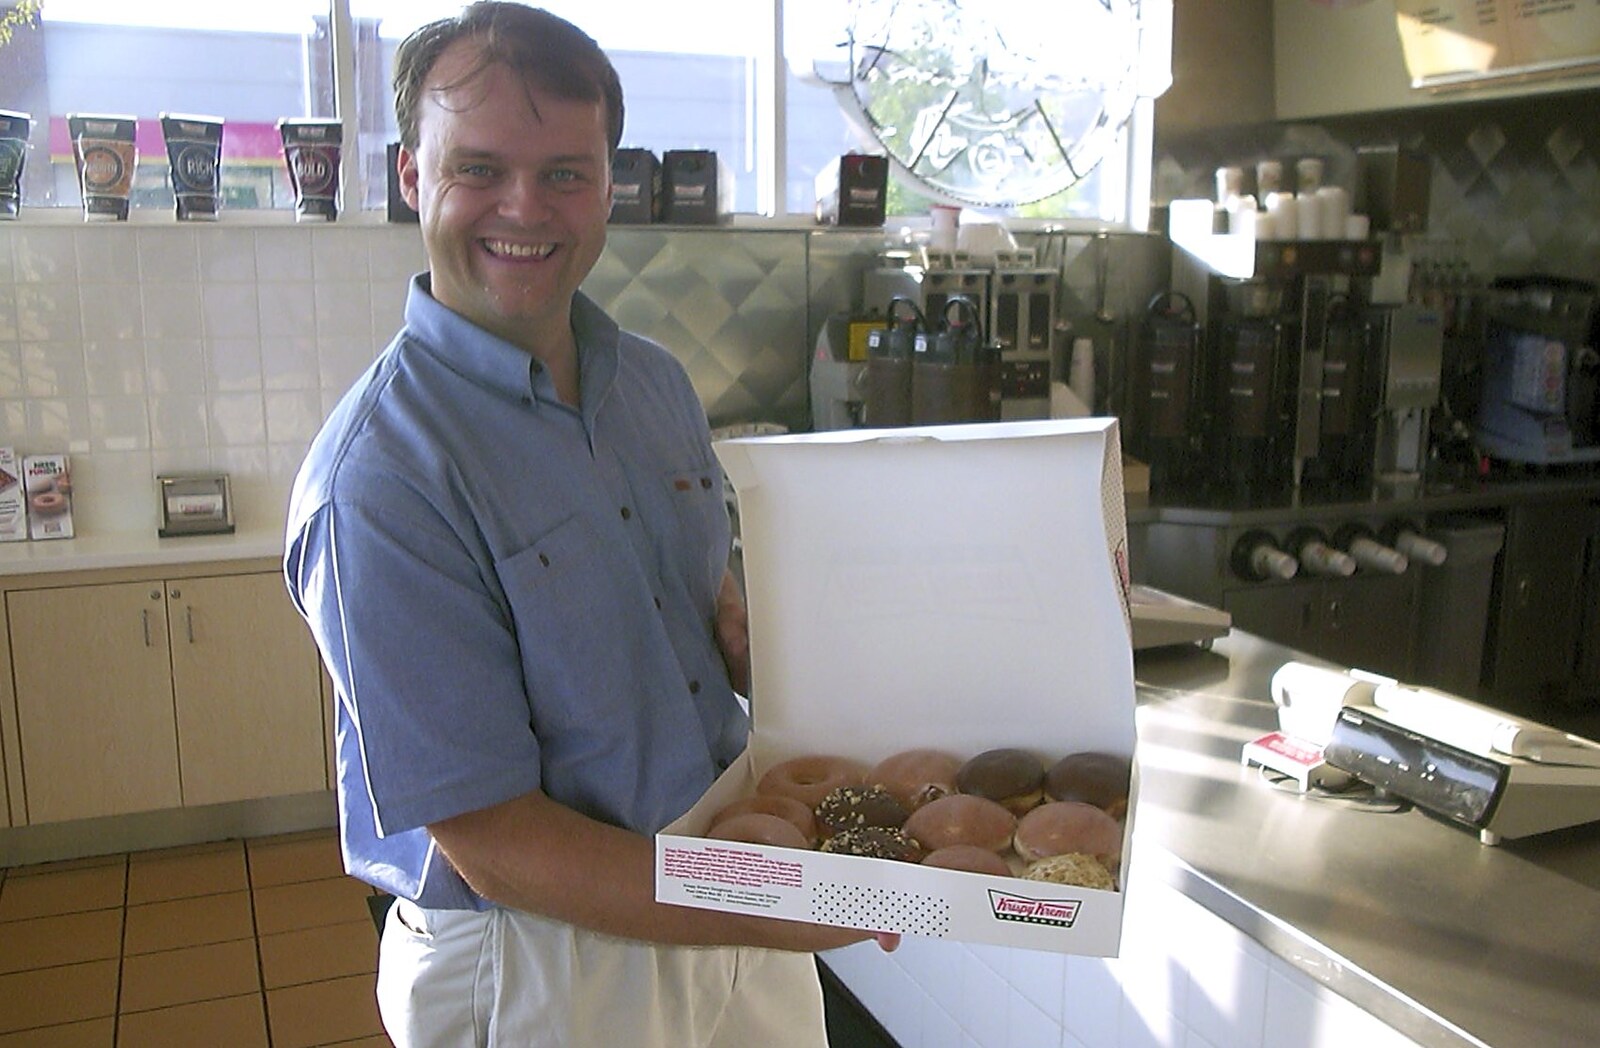 Nick shows off his prize: a 12-box of donuts from A Trip to Libertyville, Illinois, USA - 31st August 2004